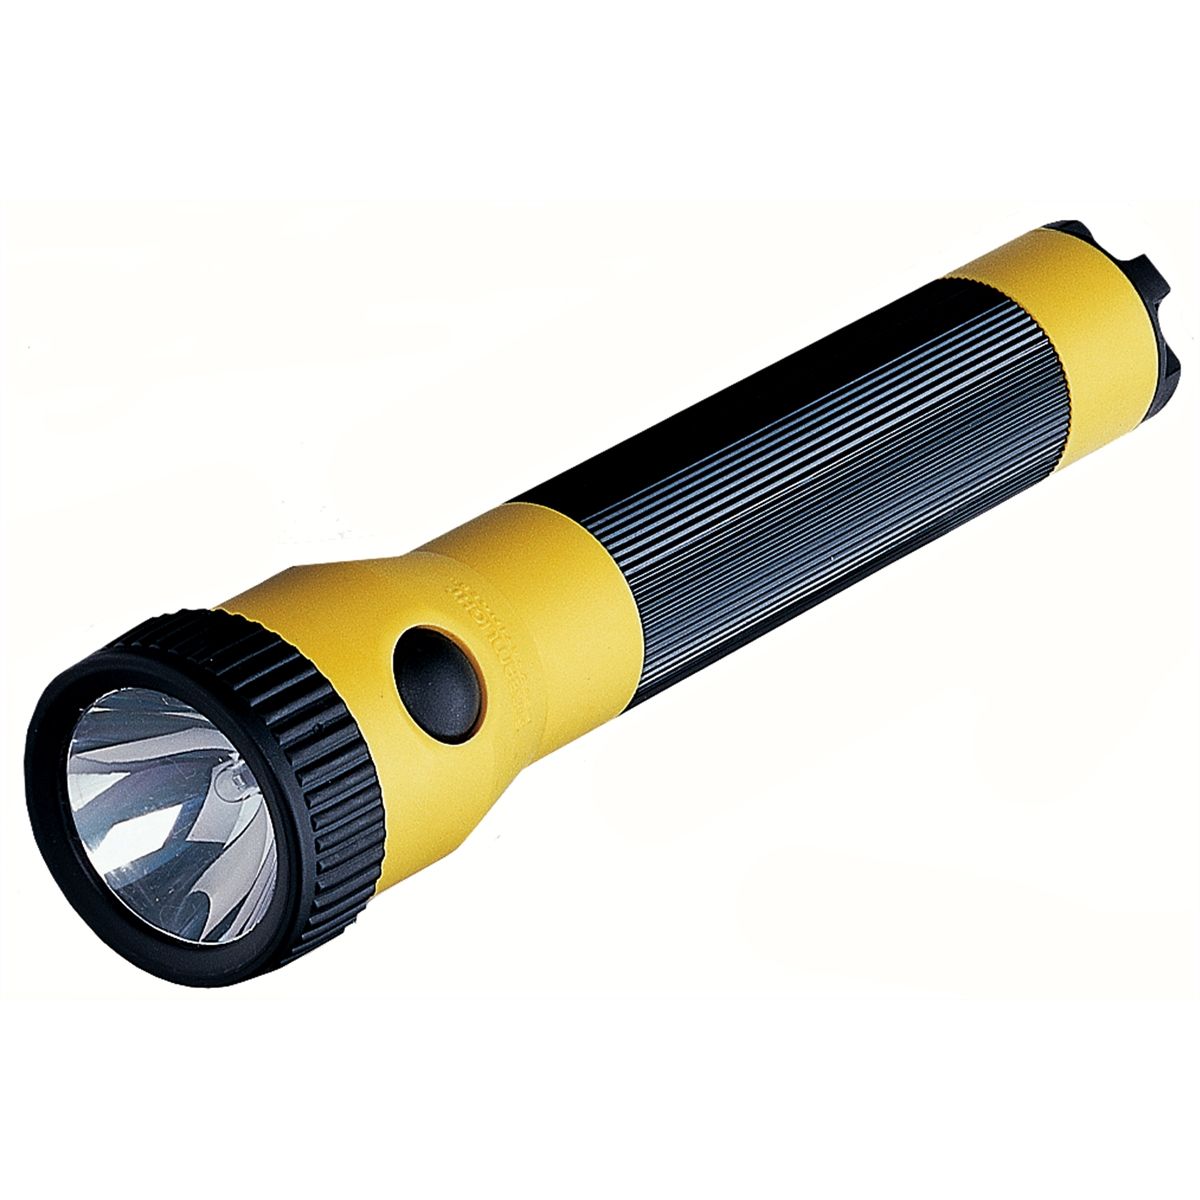 PolyStinger Rechargeable Flashlight w/o Charger (Yellow)